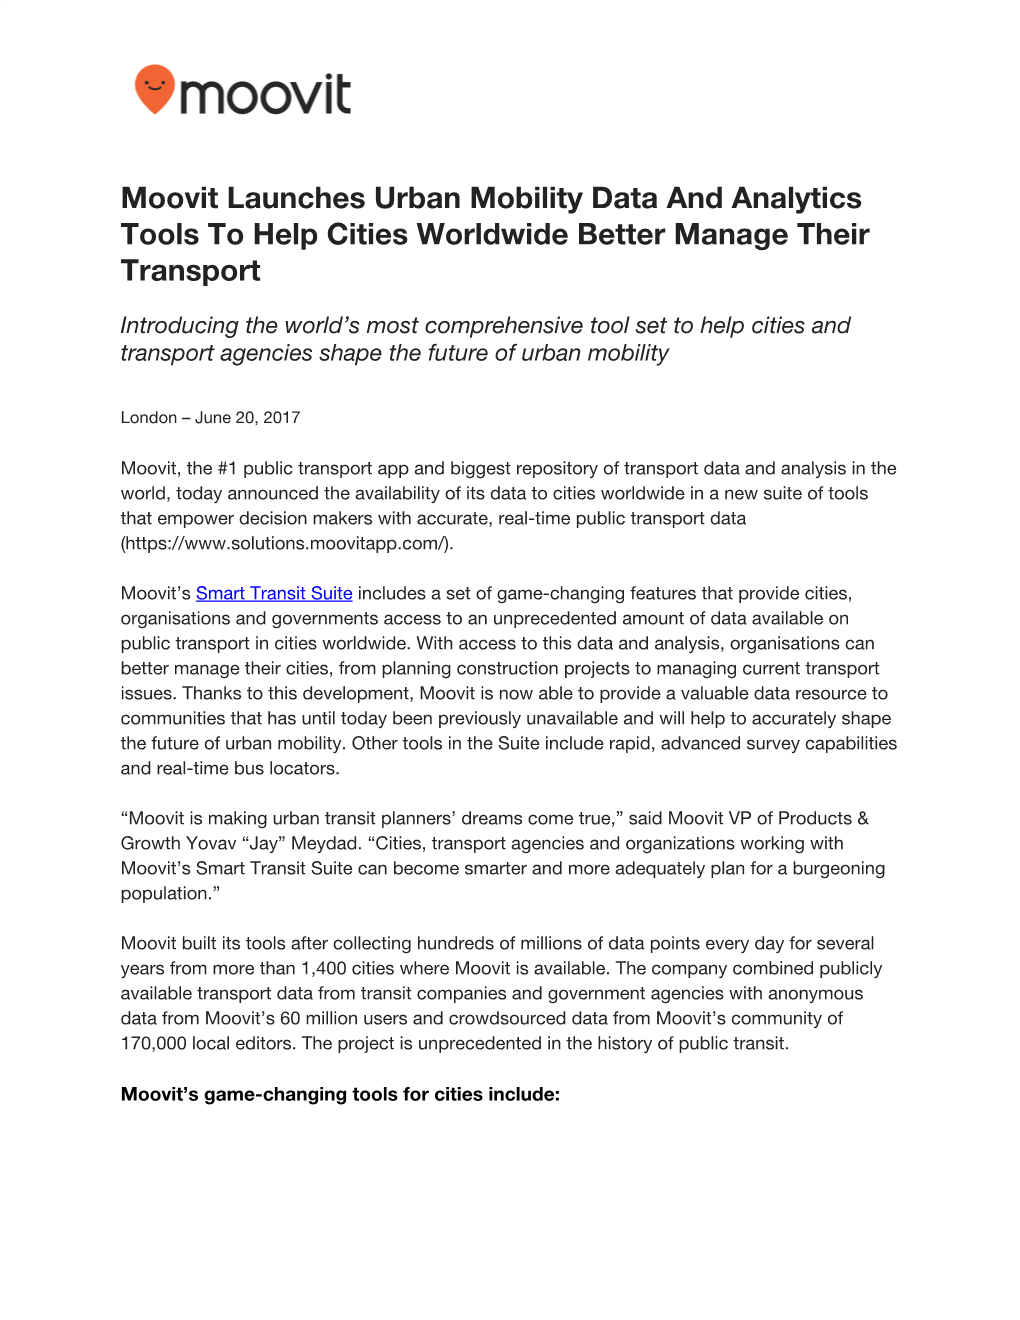 Moovit Launches Urban Mobility Data and Analytics Tools to Help Cities Worldwide Better Manage Their Transport